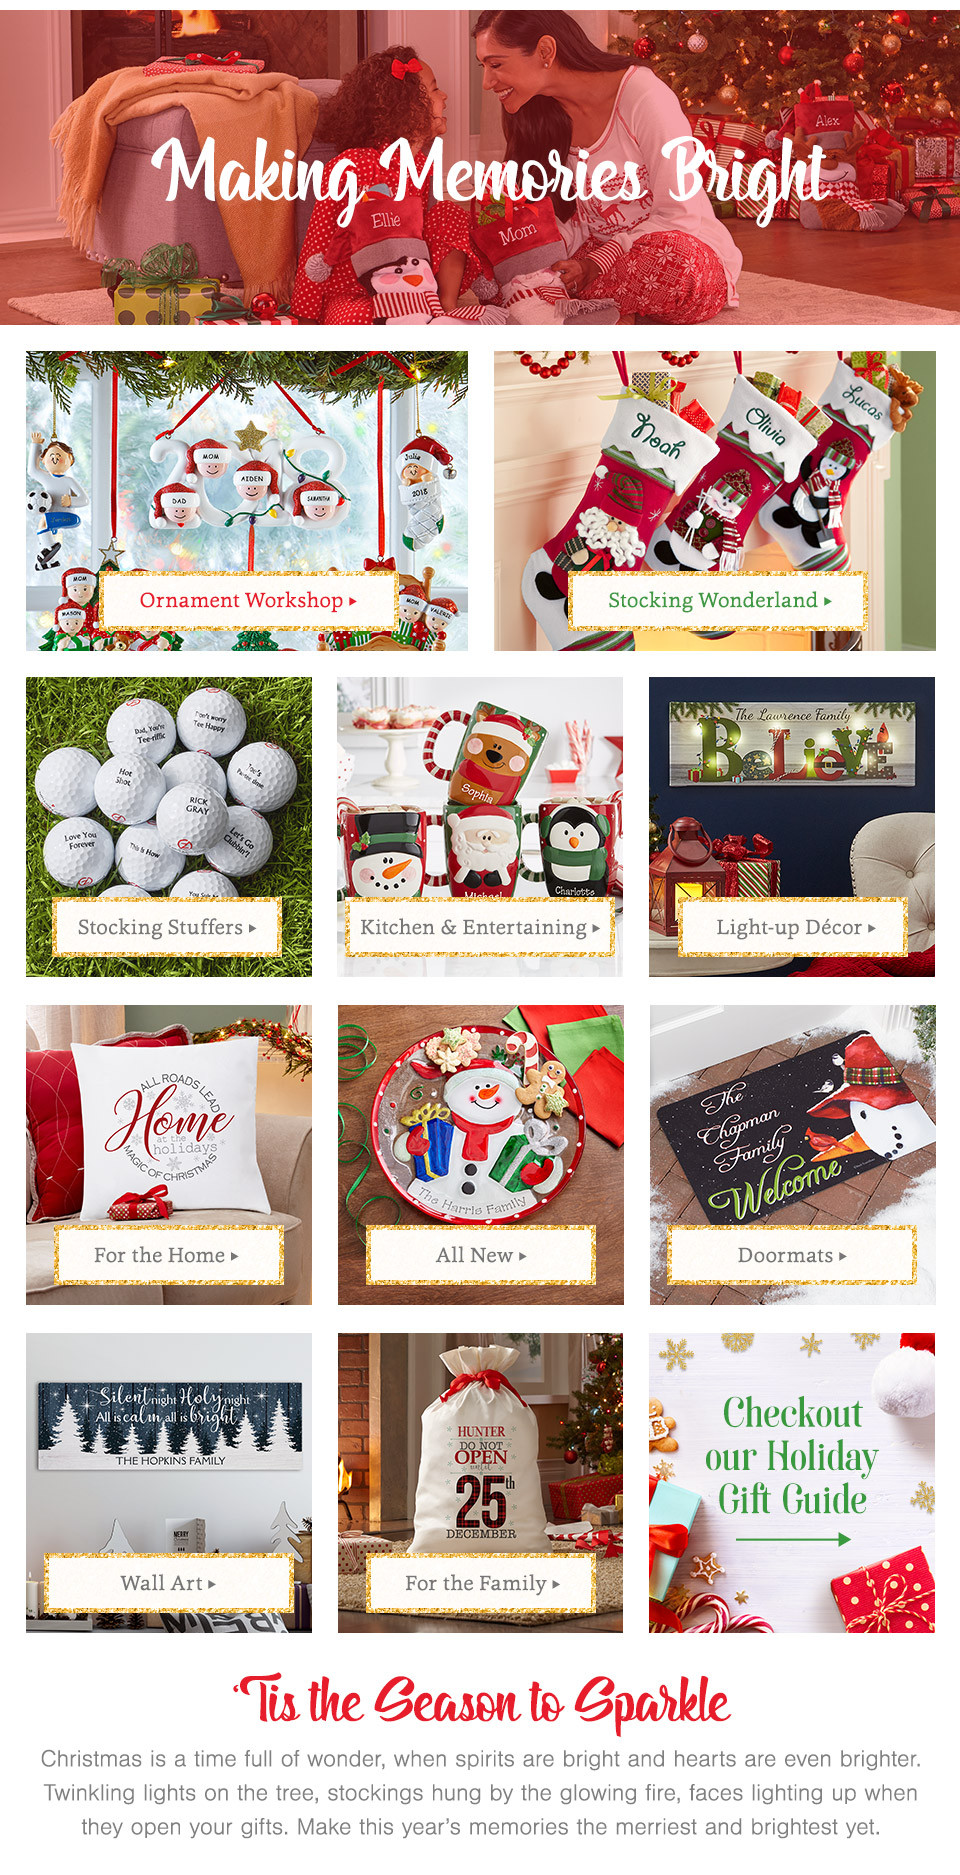 Customer Christmas Gift Ideas
 2019 Personalized Christmas Gifts